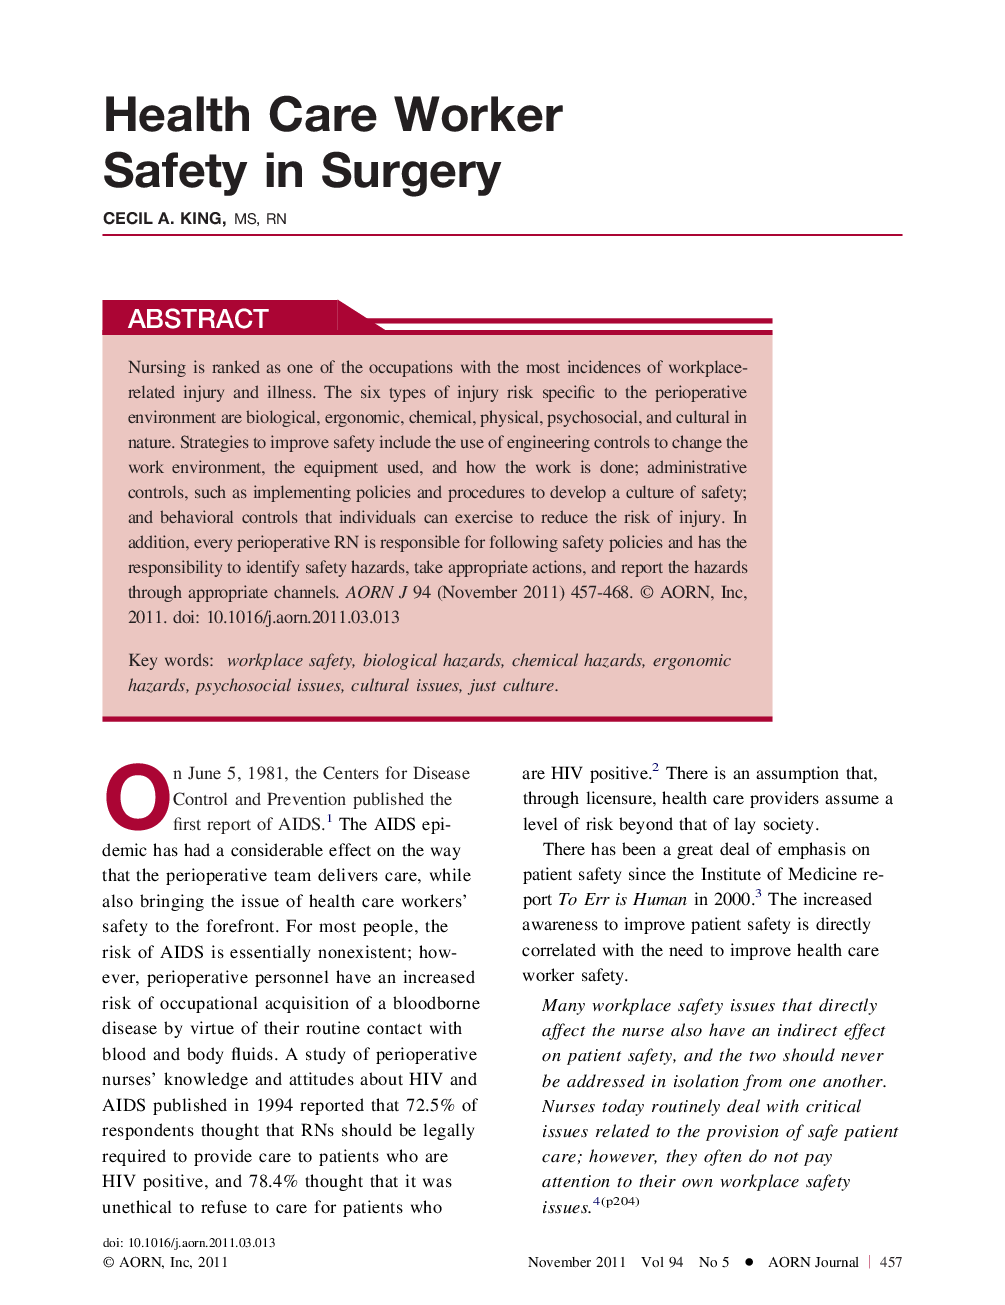 Health Care Worker Safety in Surgery